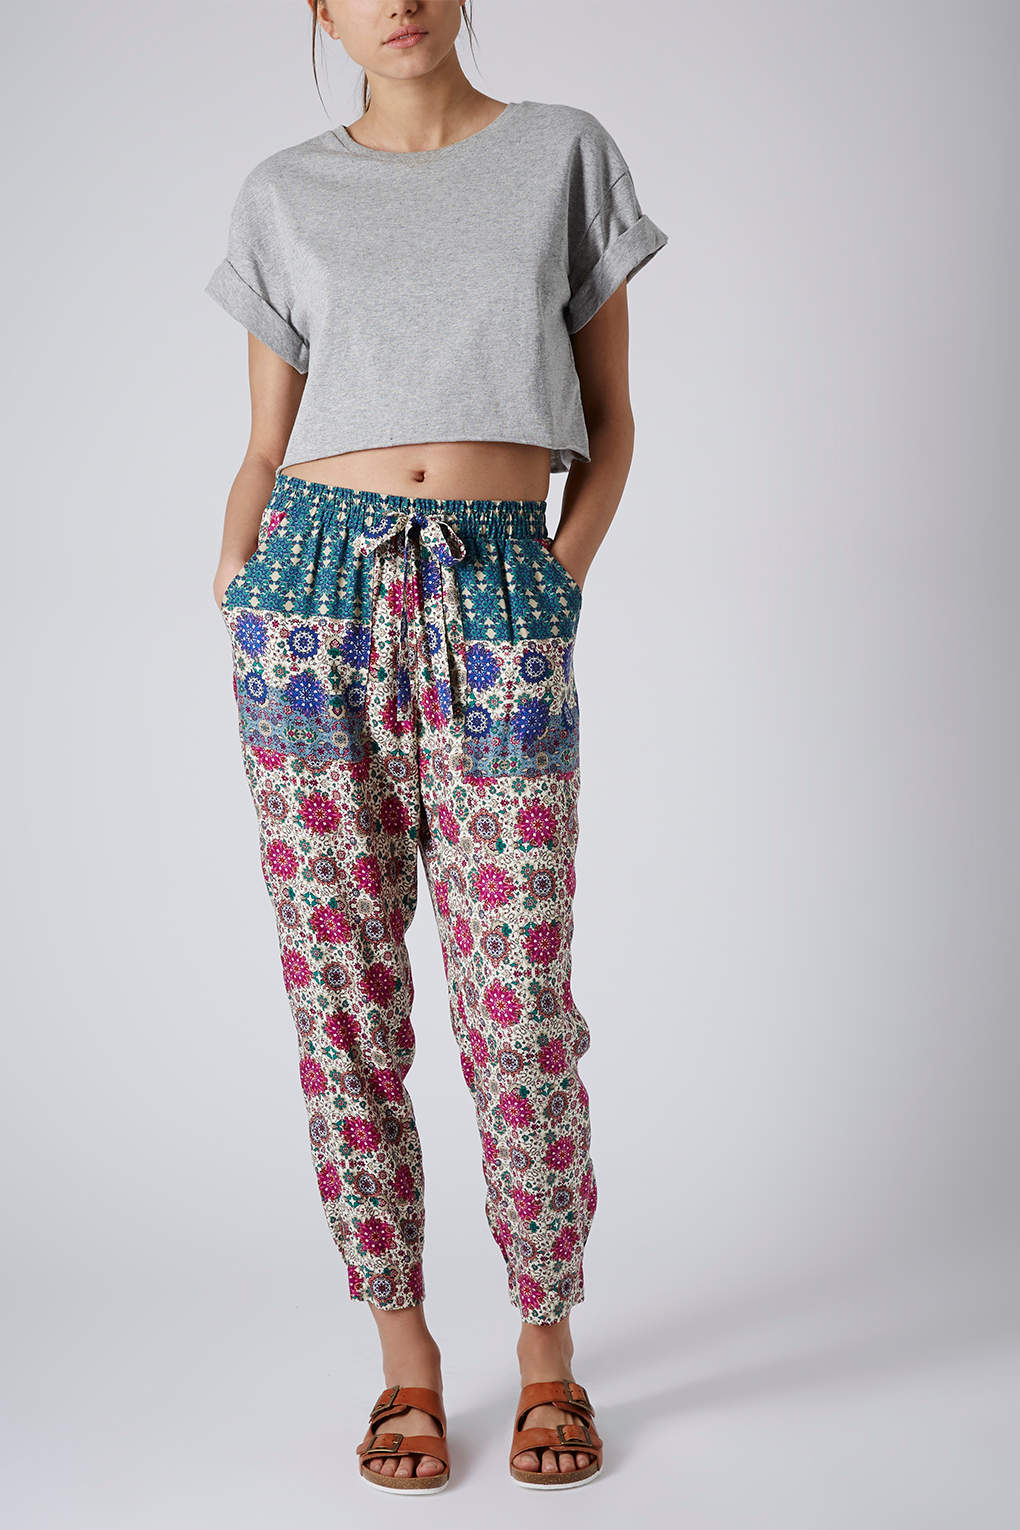 Lyst - Topshop Floral Utility Trousers